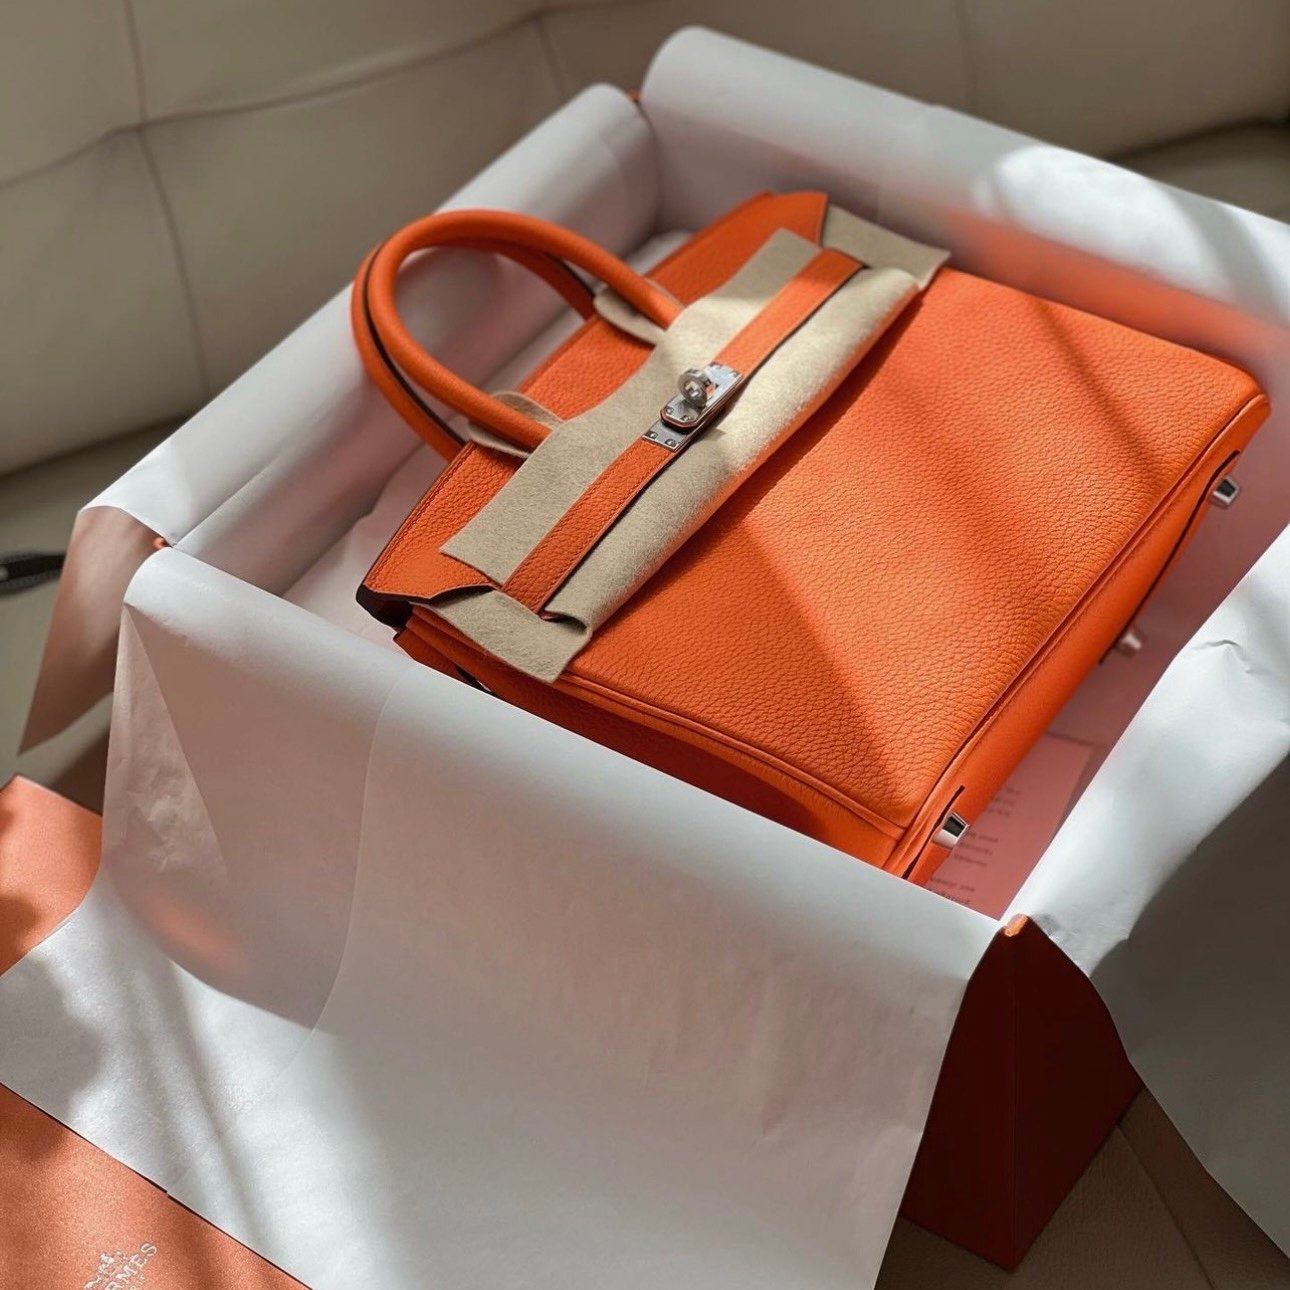 hermes grey colors - Google Search  กระเป๋า hermes, กระเป๋า, สี